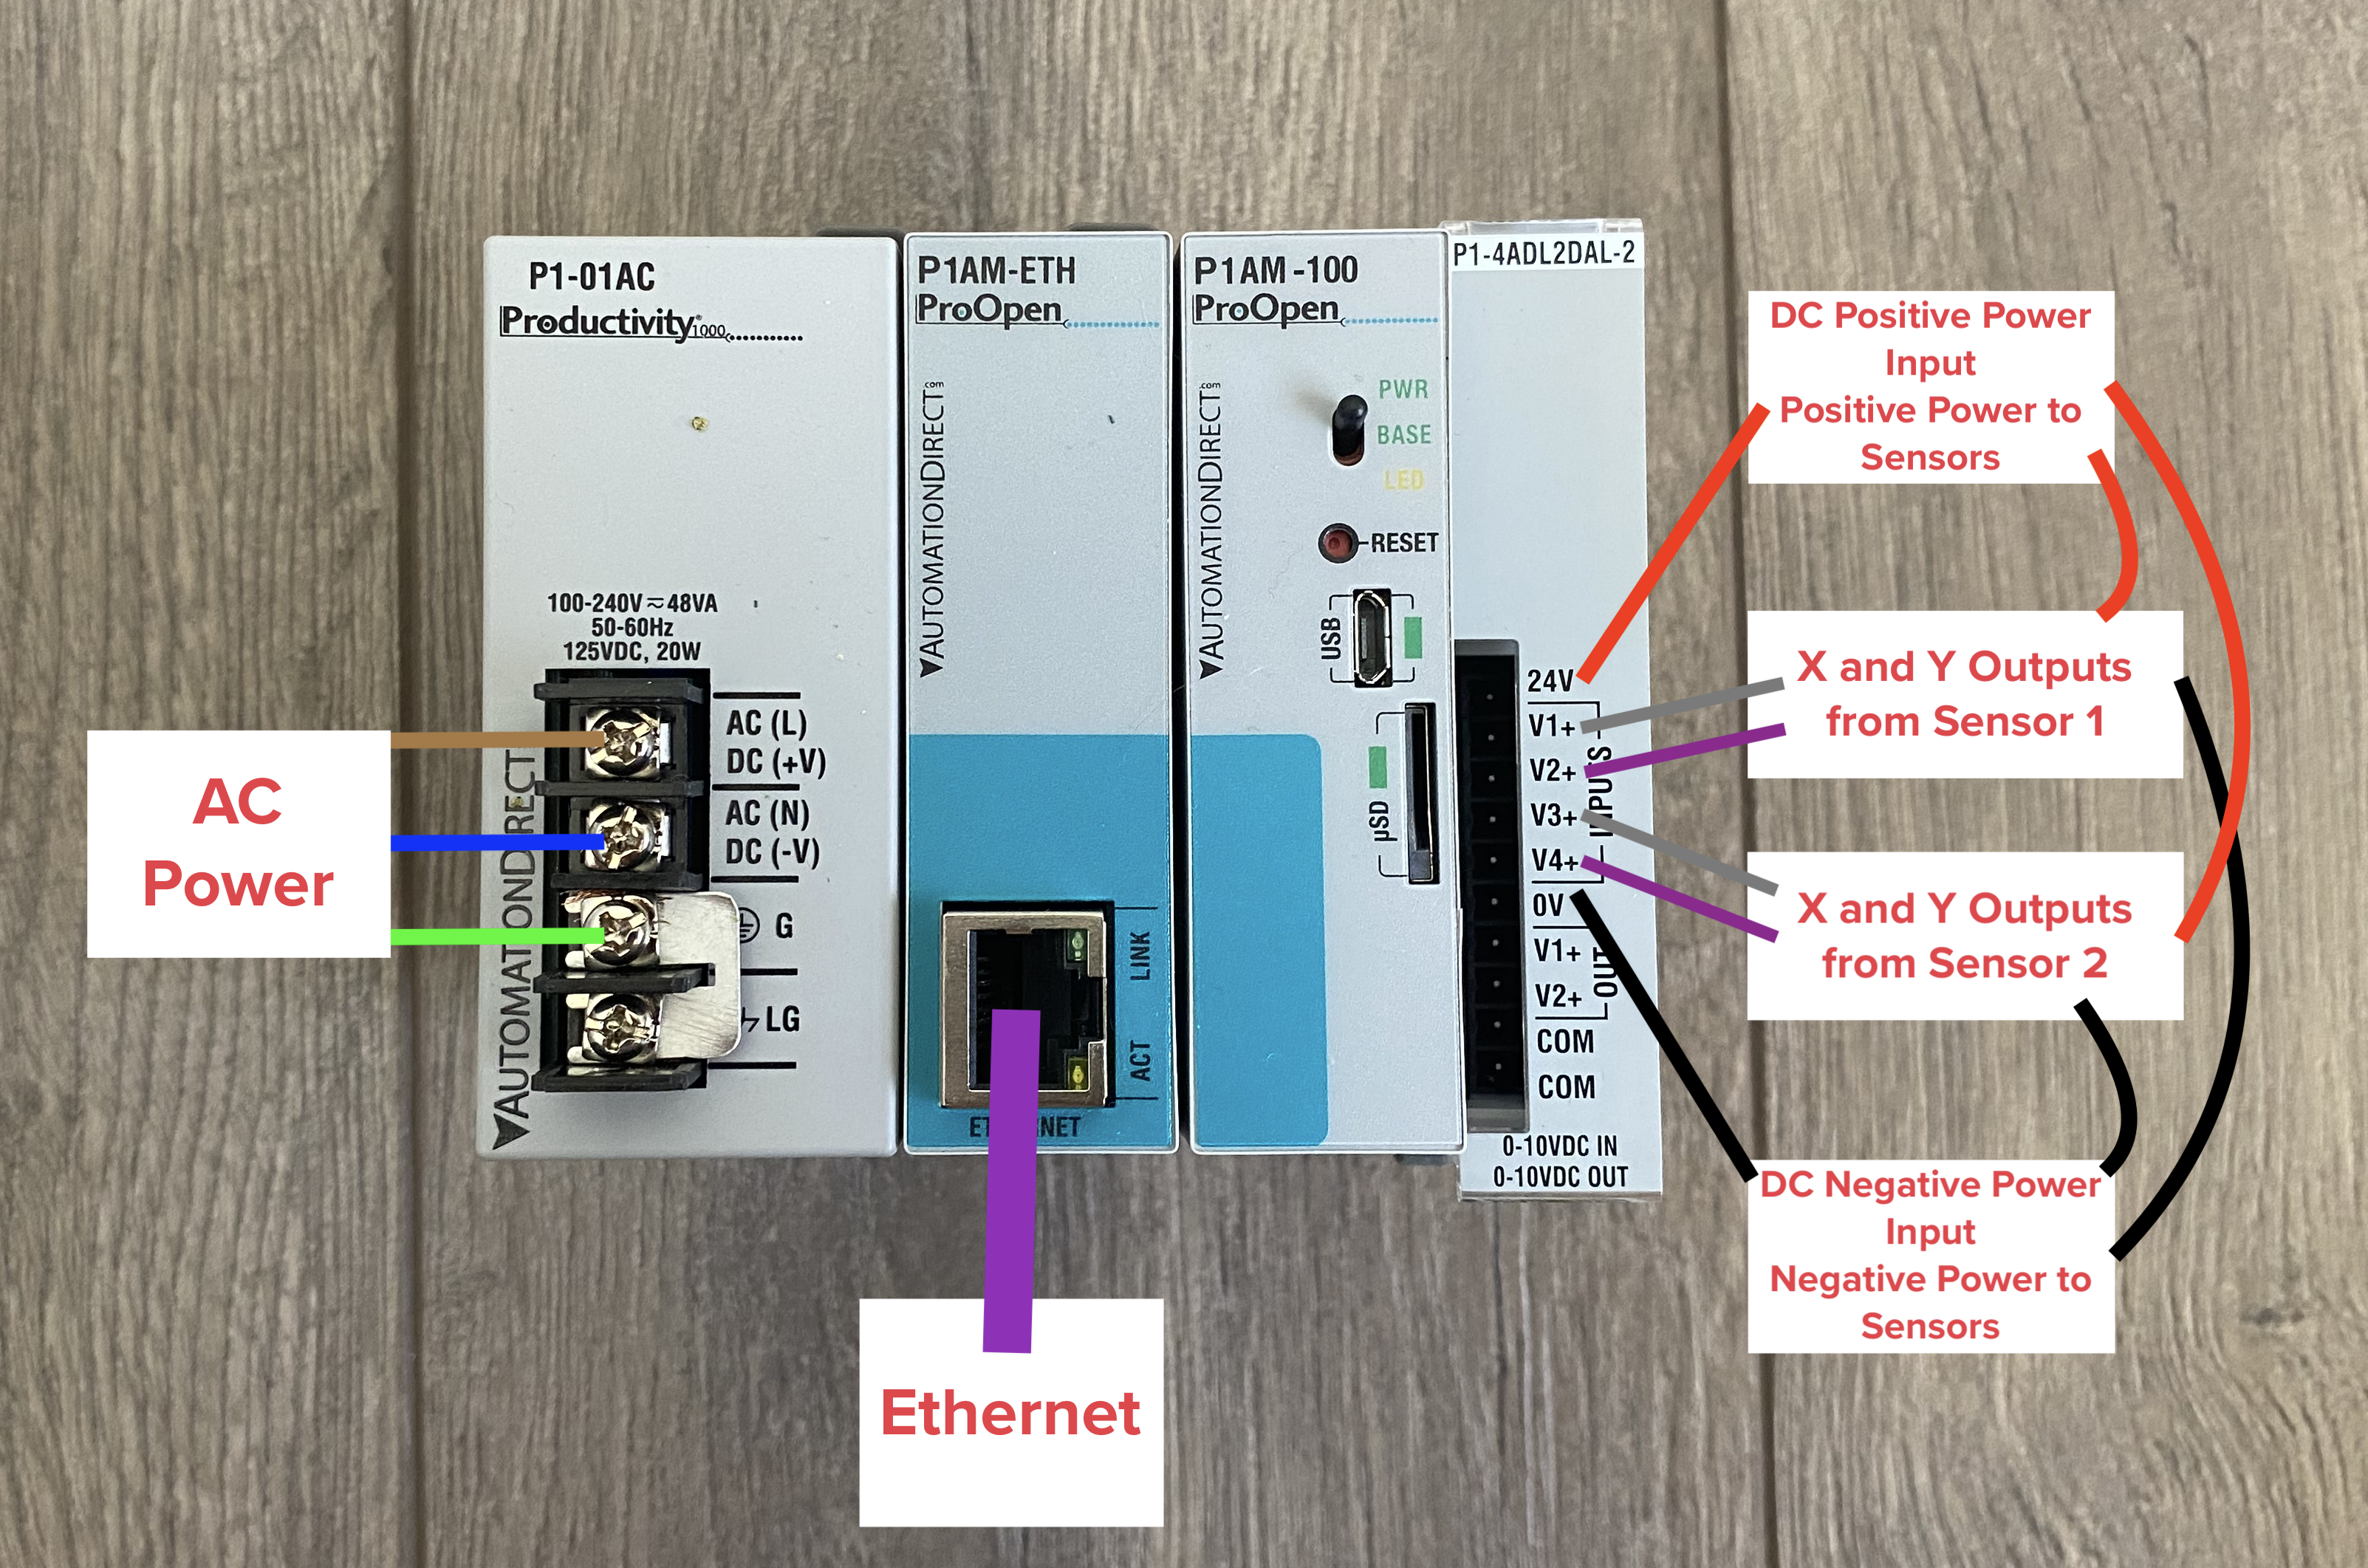 Industrial automation modules with AC power input, Ethernet connection, and DC power wiring annotations for sensor outputs.